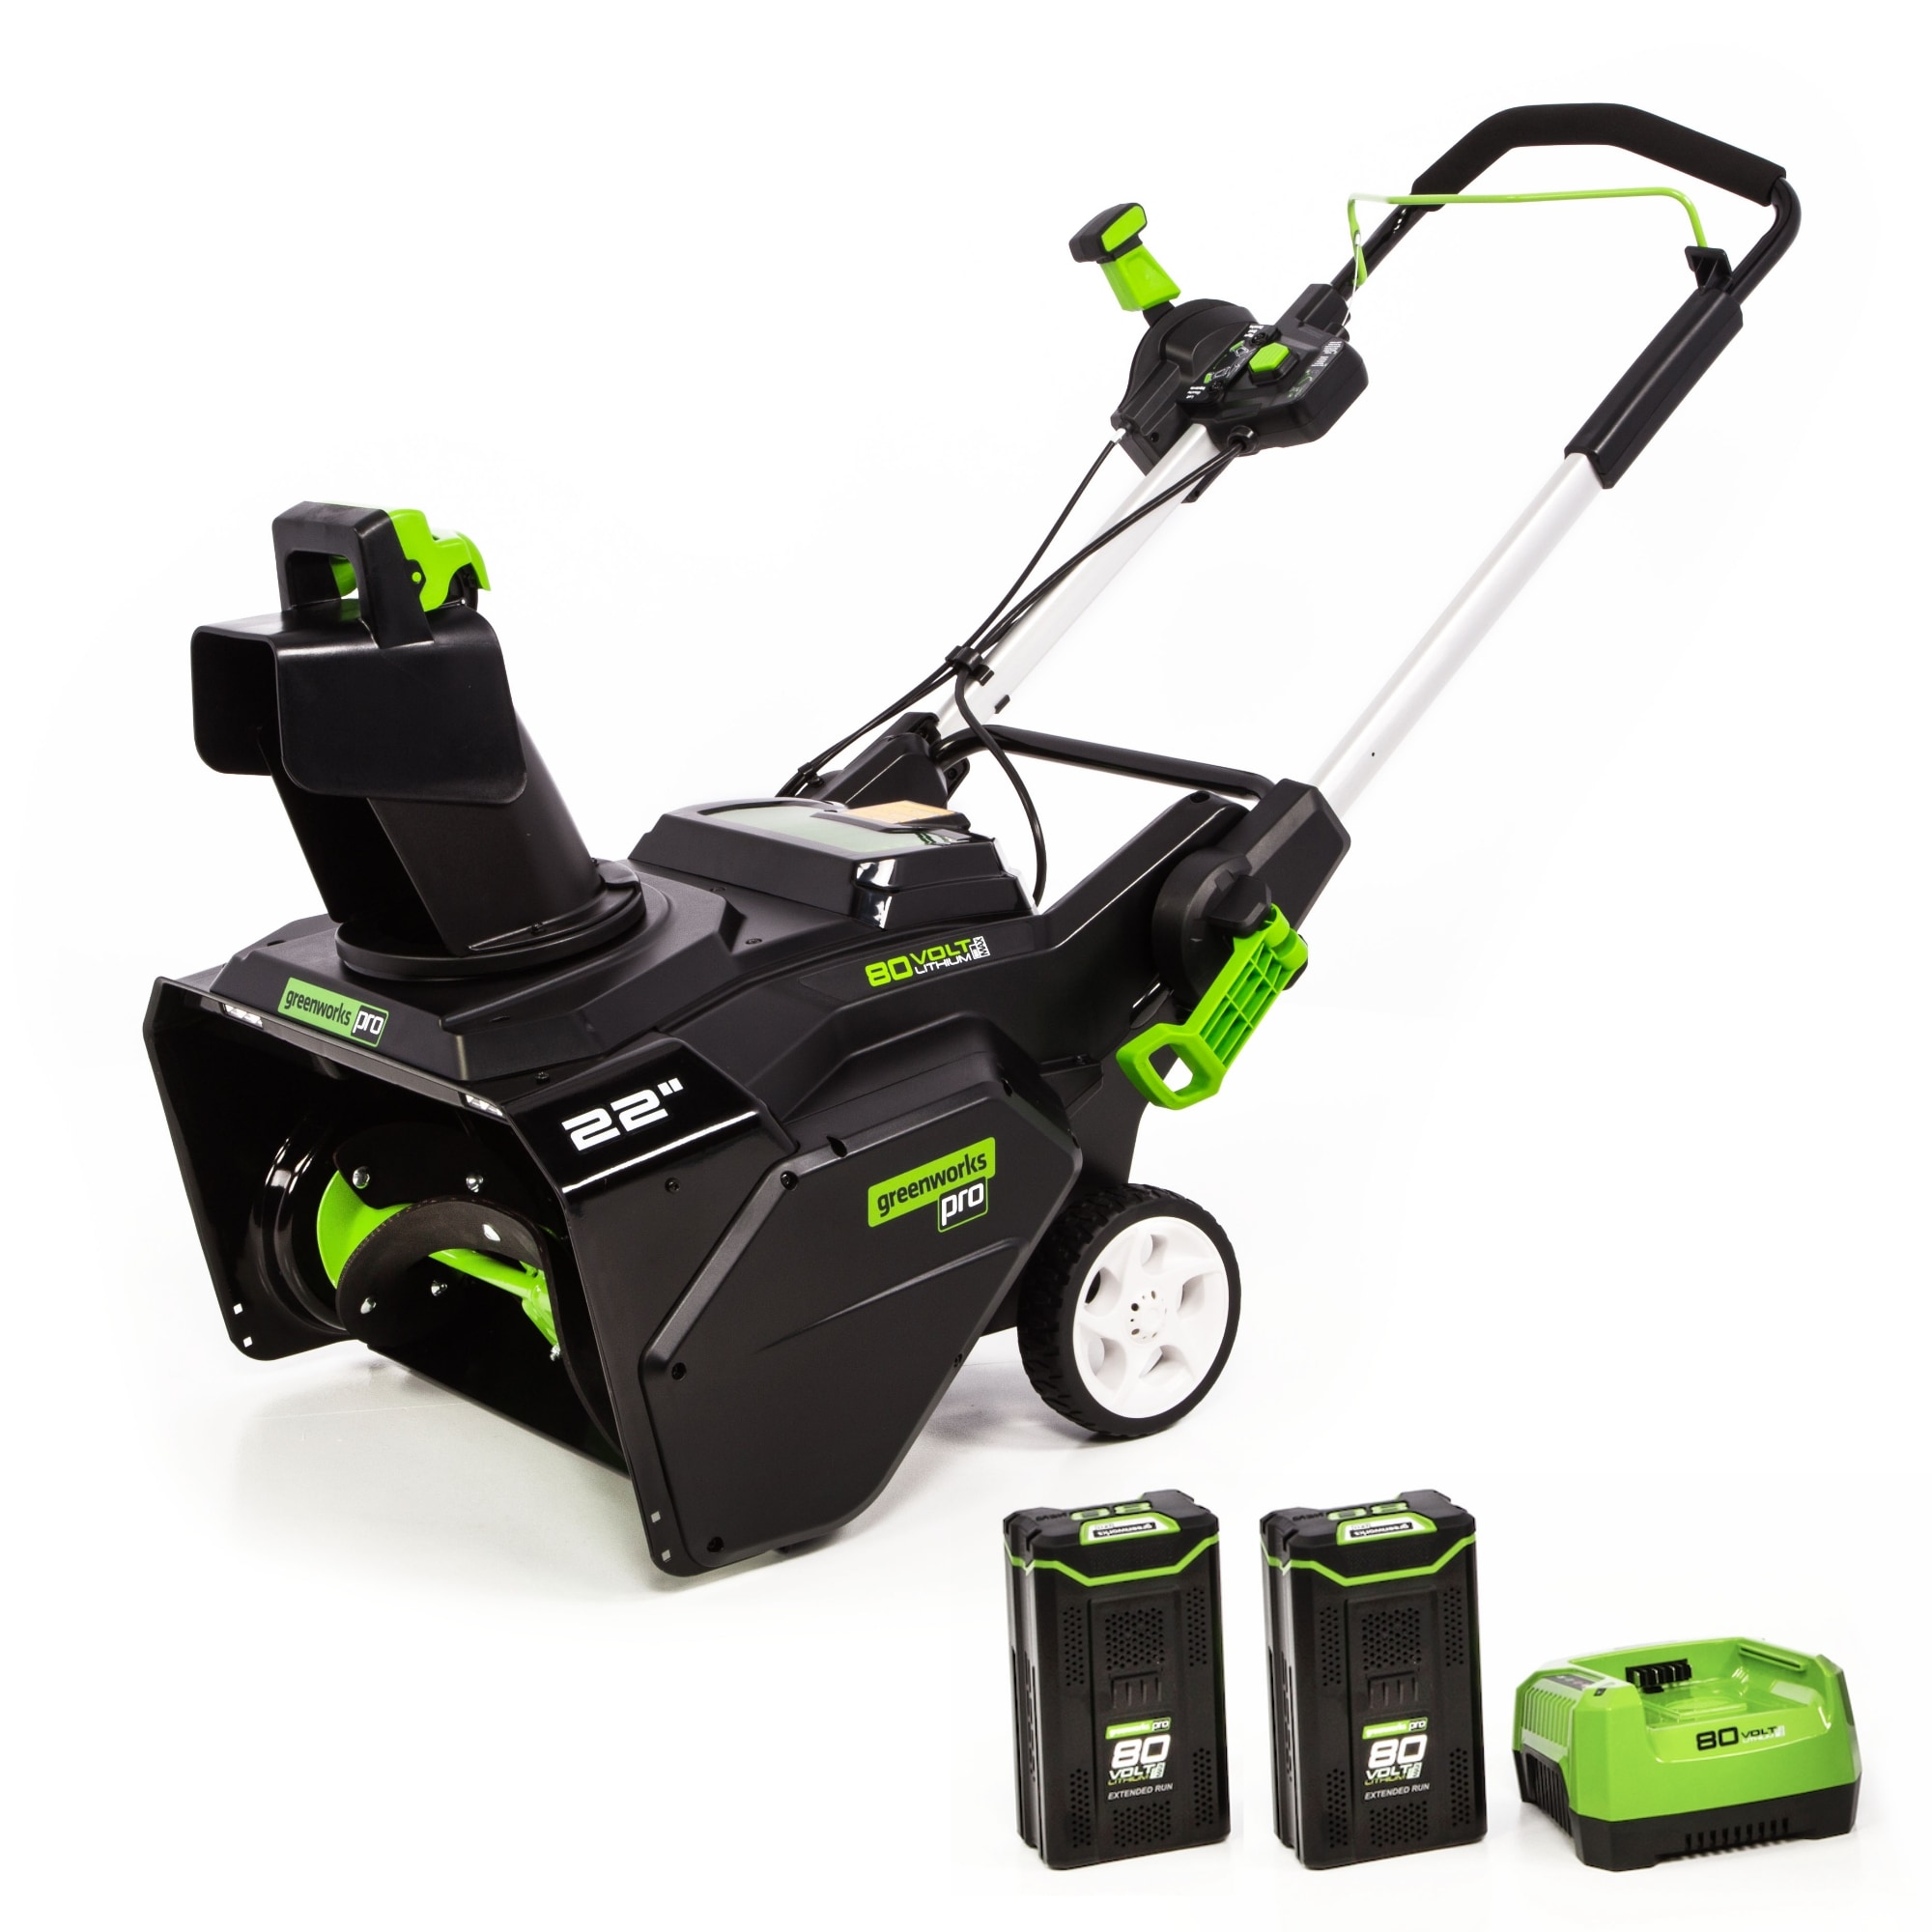 80-volt 22-in Single-stage Push Cordless Electric Snow Blower 4 Ah (Battery and Charger Included) | - Greenworks Pro SN80L422